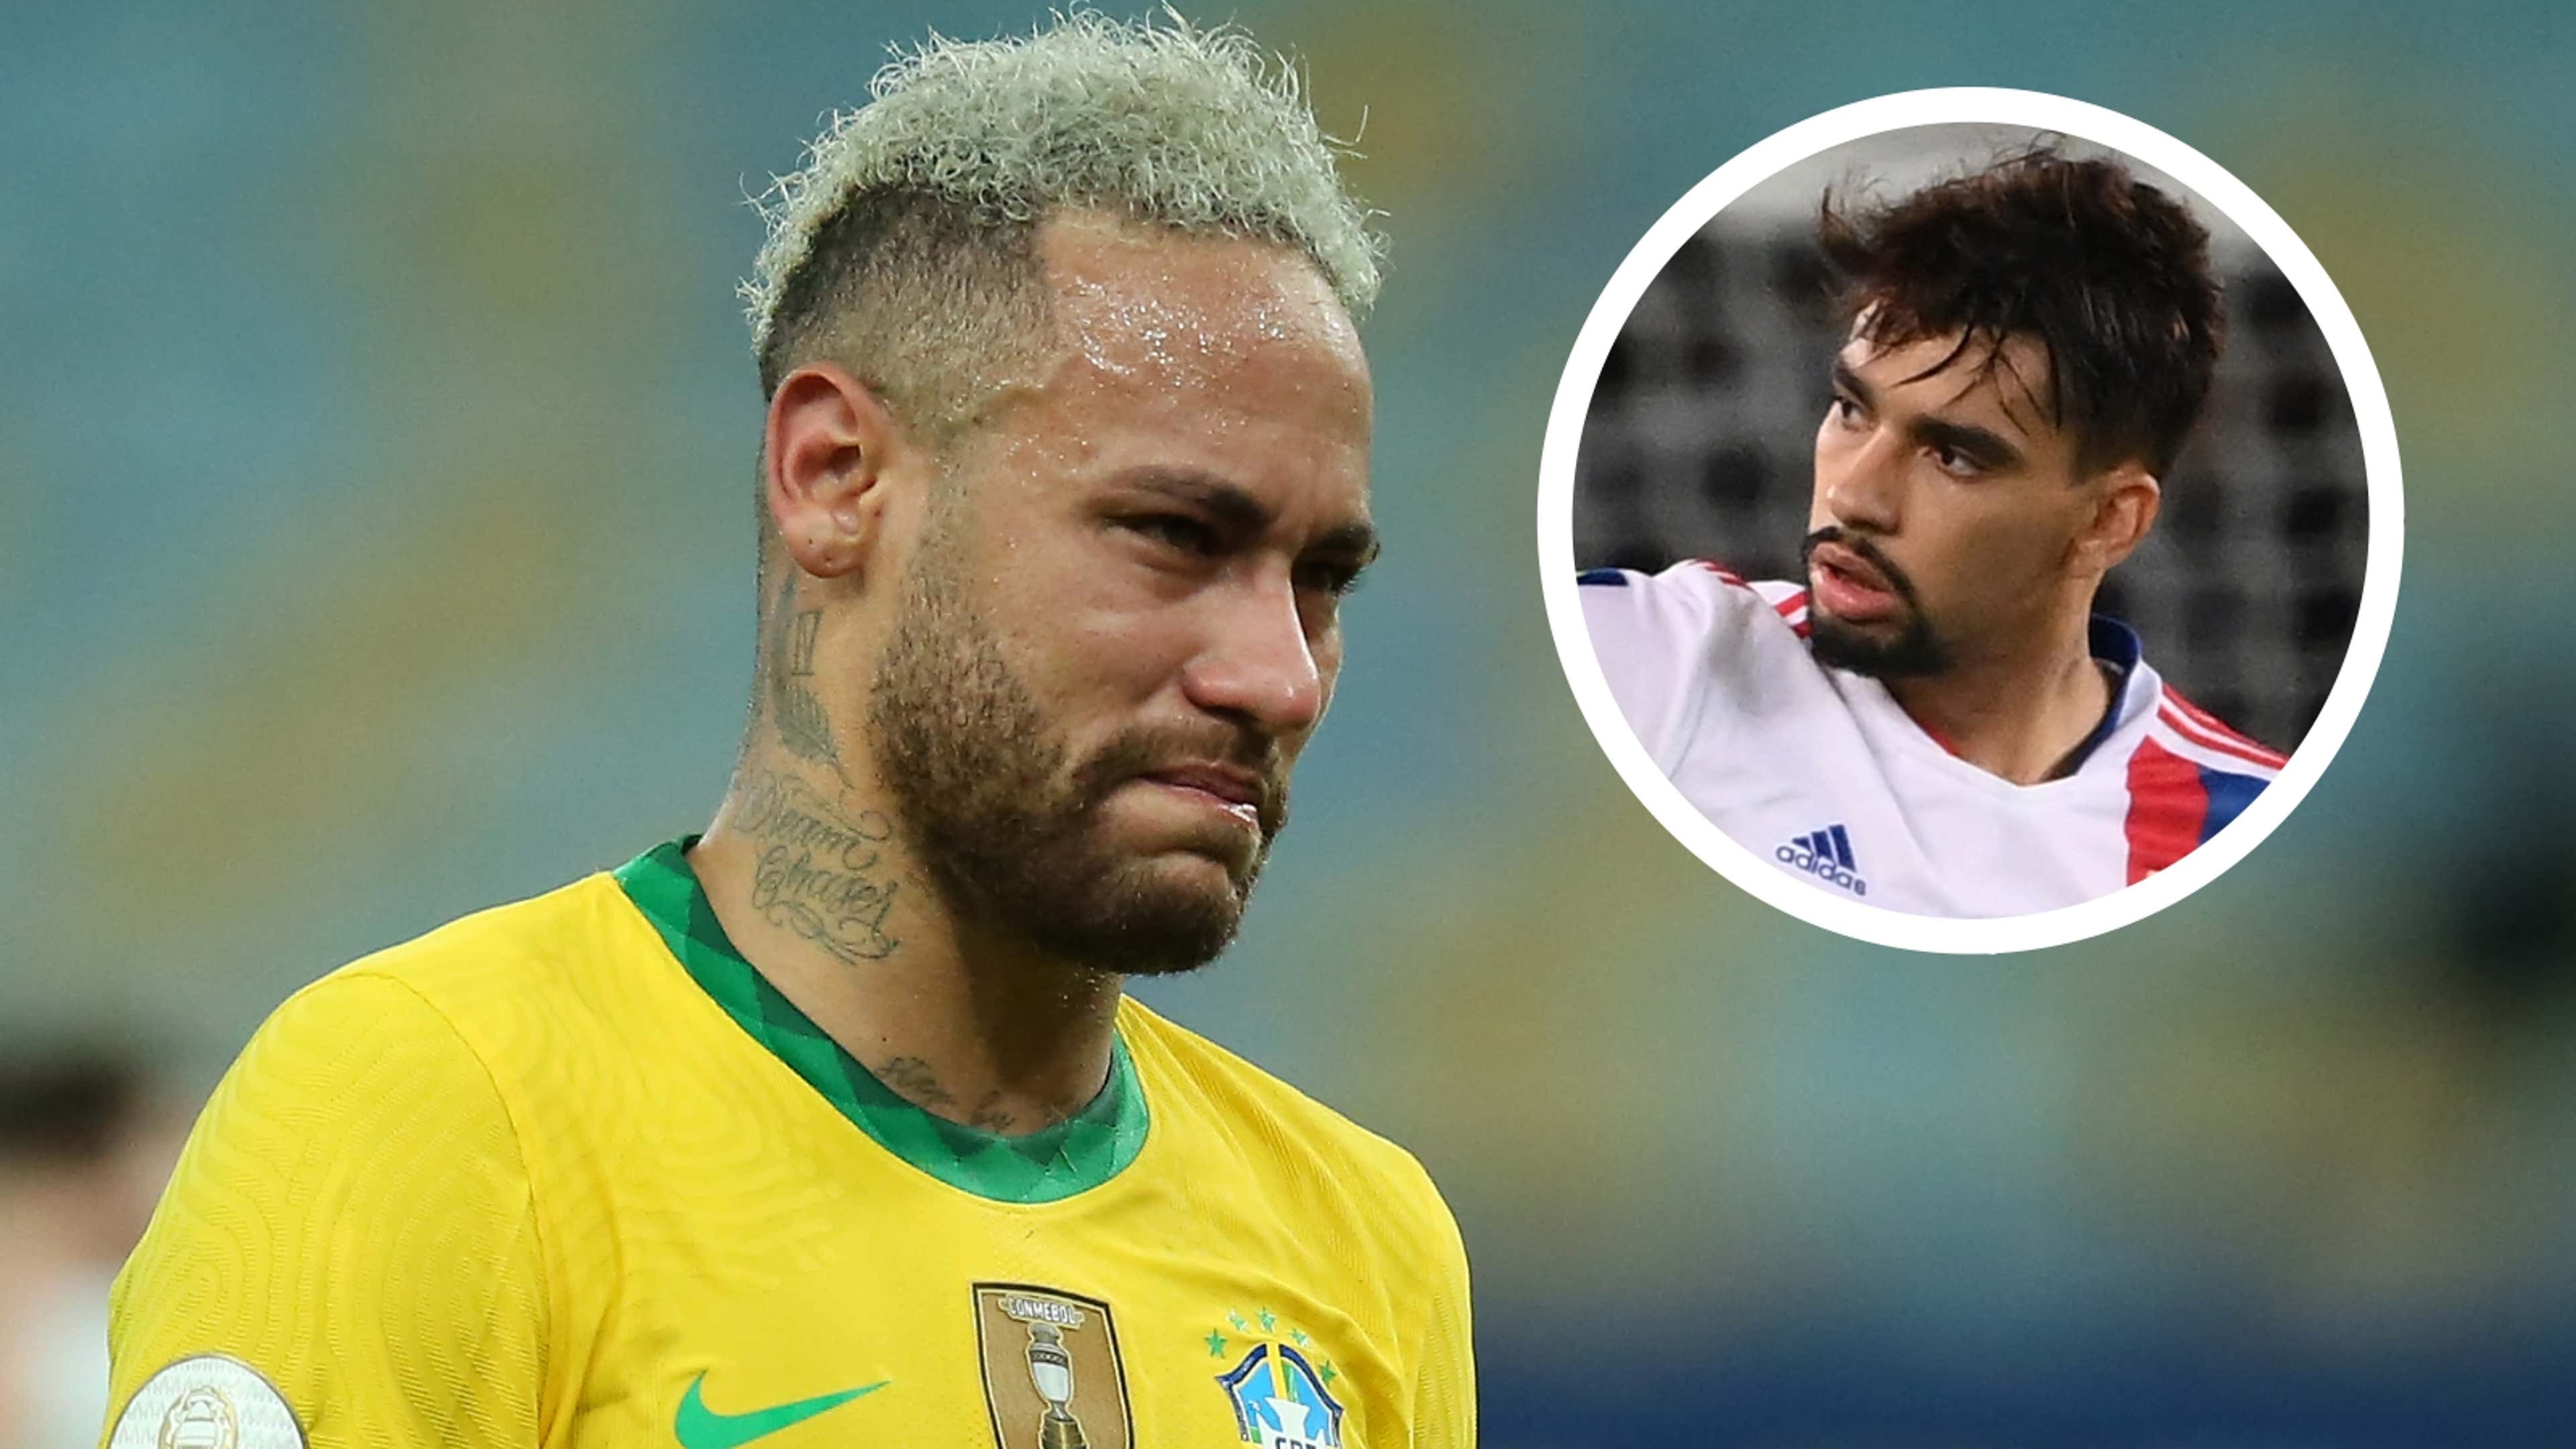 Joga Bonito is over' - Neymar reacts to rainbow flick booking for